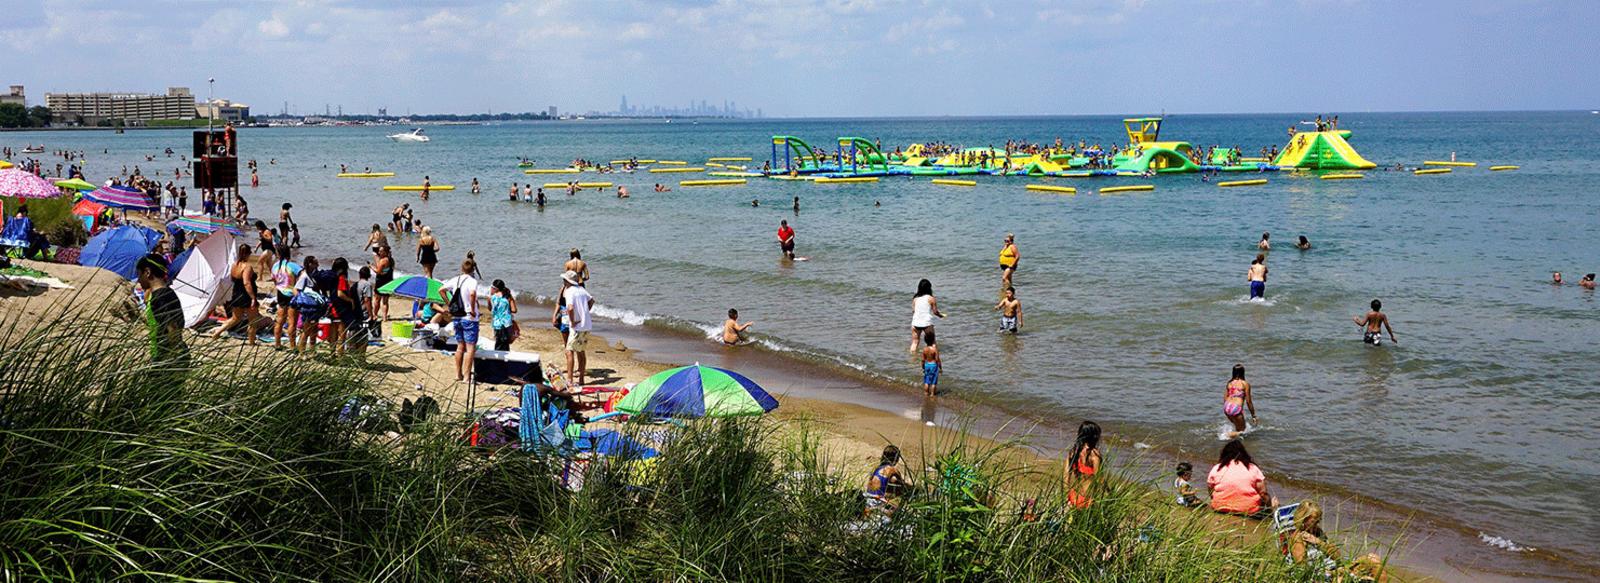 Whihala Beach Whiting Lakefront Park In Northwest Indiana